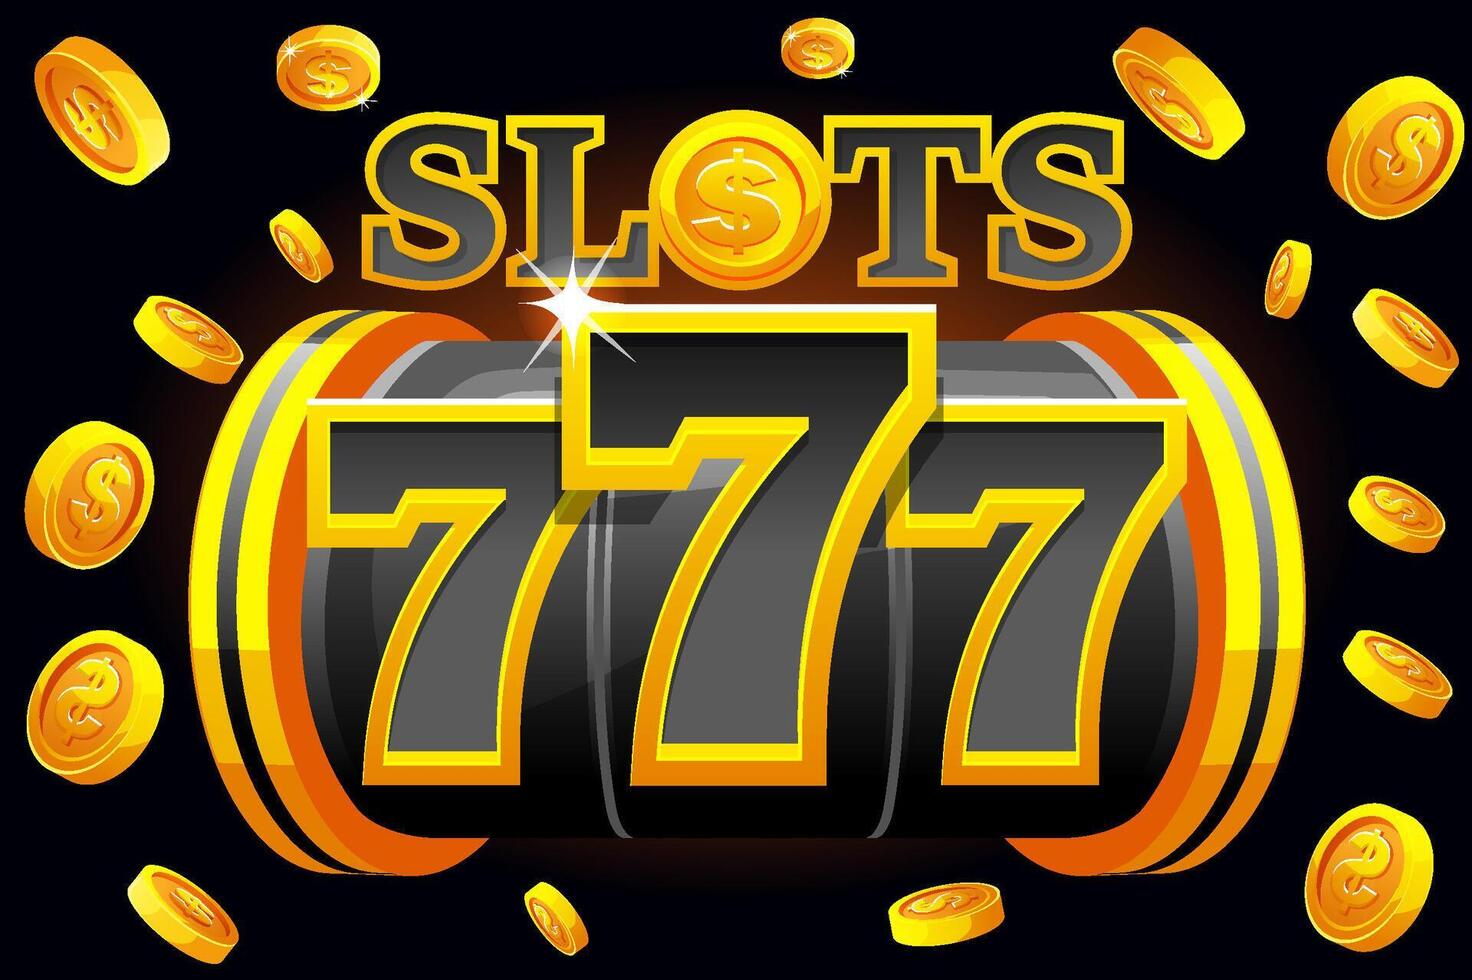 Slot machine 777 with explosion coins. Golden and black Banner for a casino game. vector